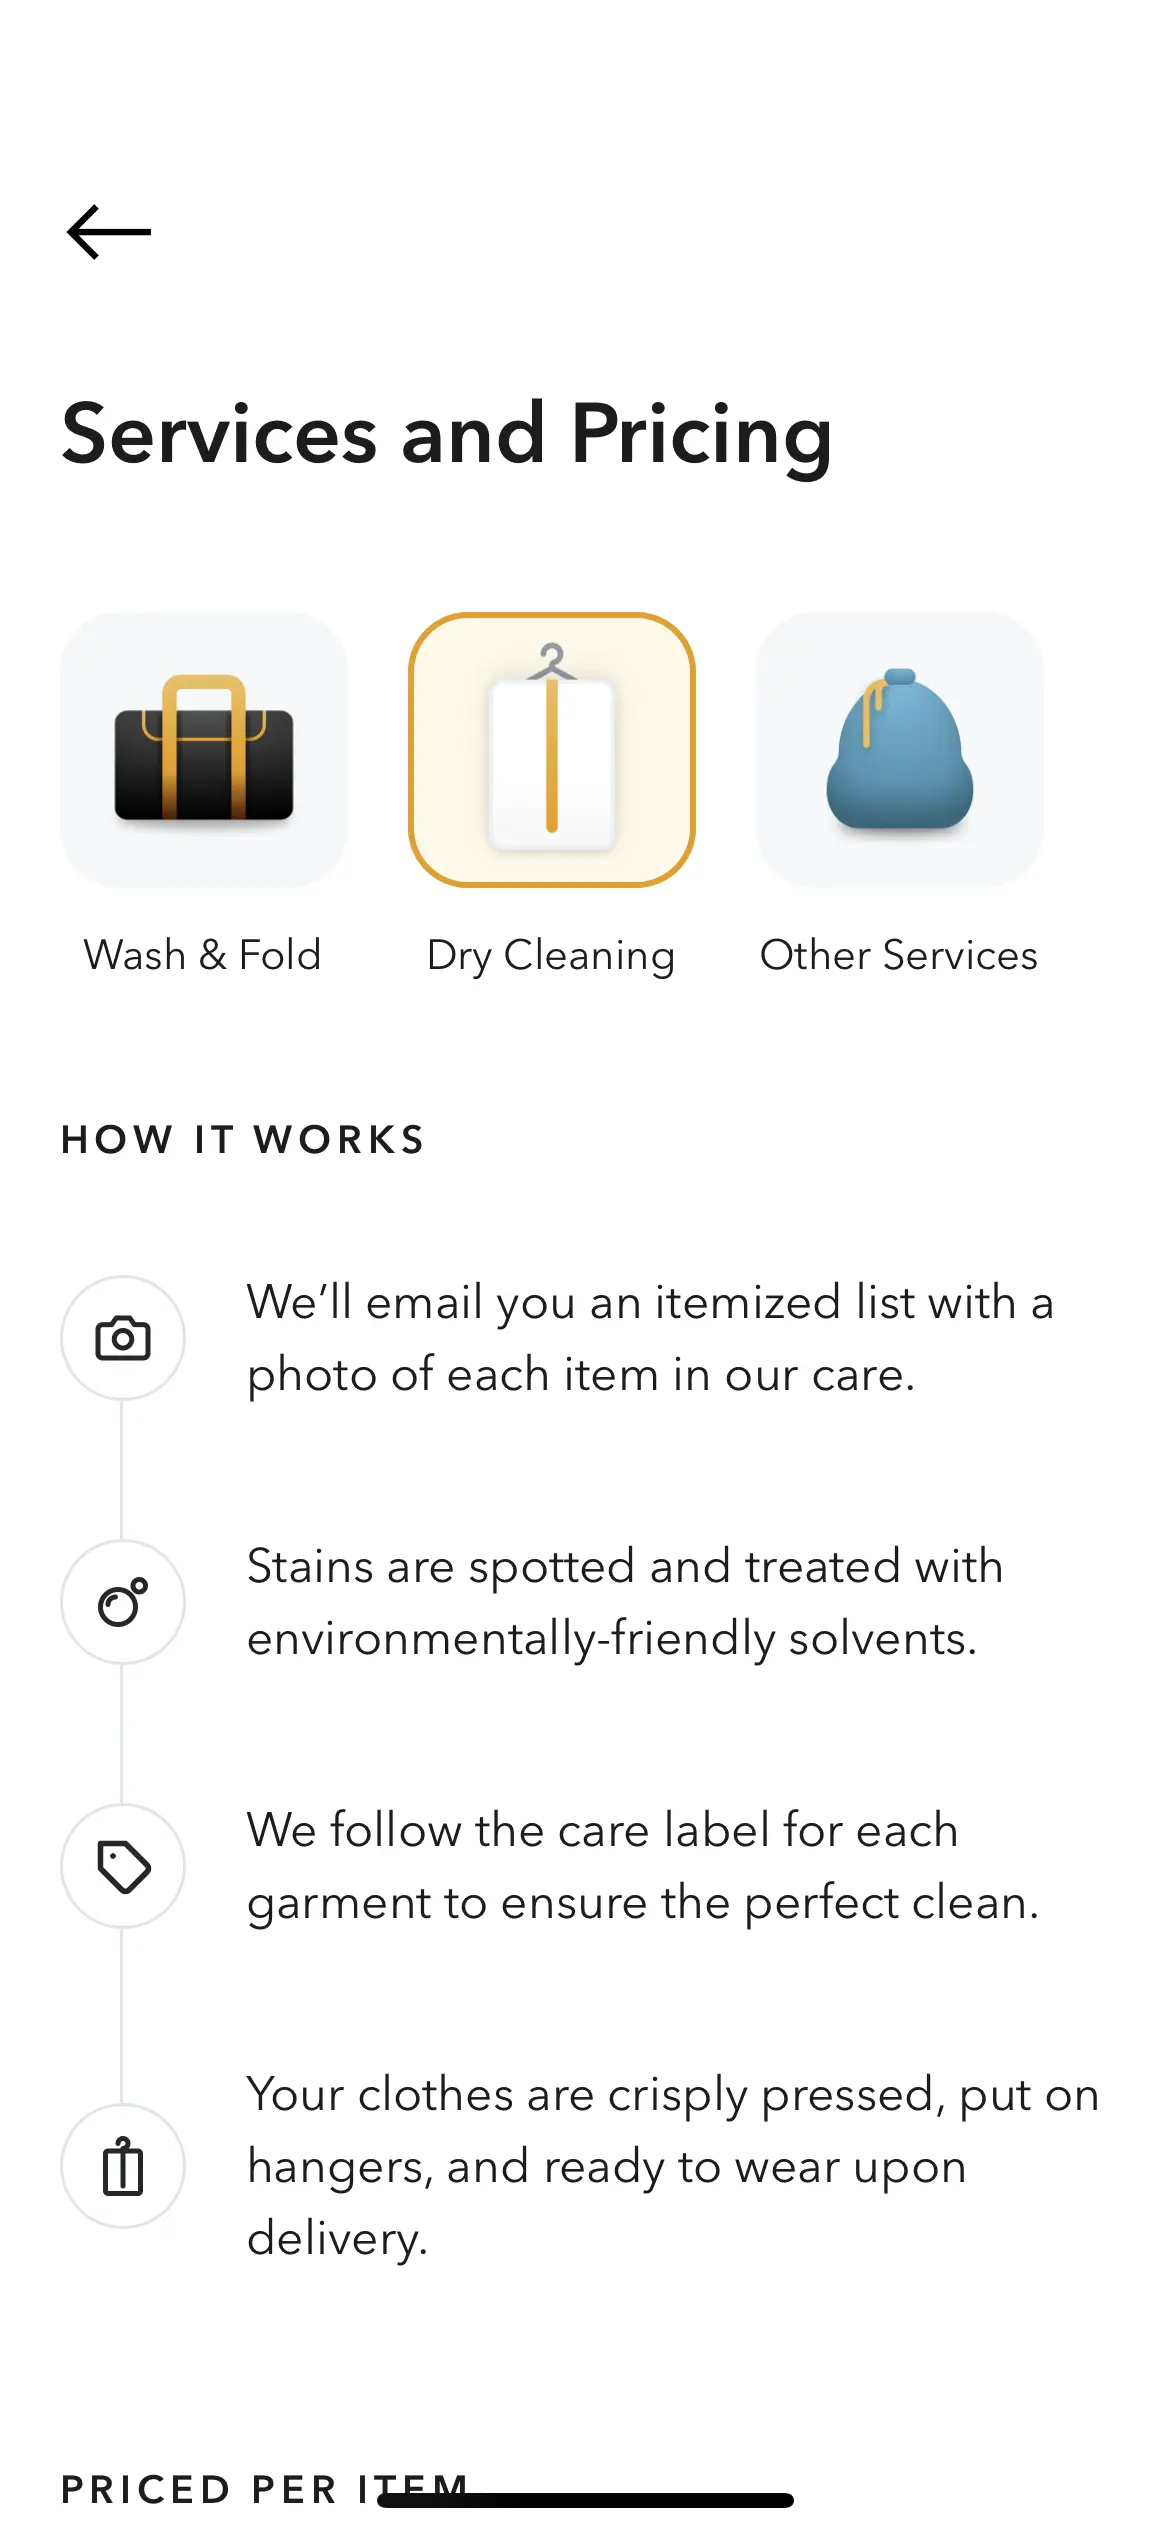 Mobile app screenshot showing the benefits of the dry cleaning service within the app